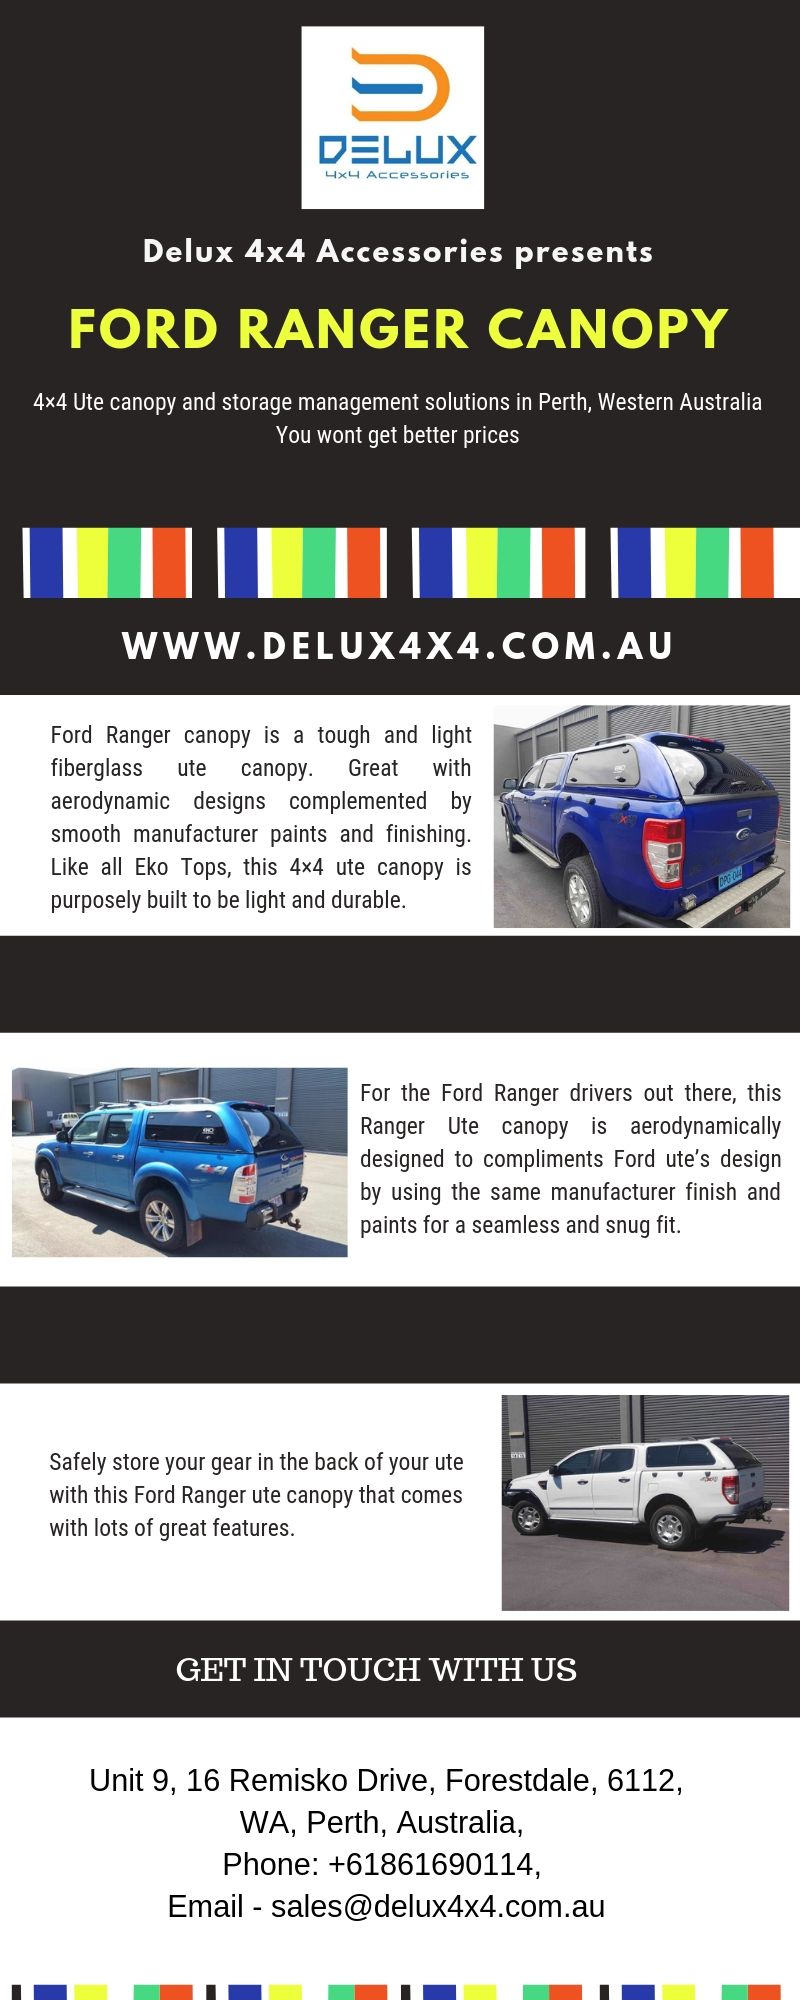 Ford Ranger Canopy.jpg  by deluxaccessories